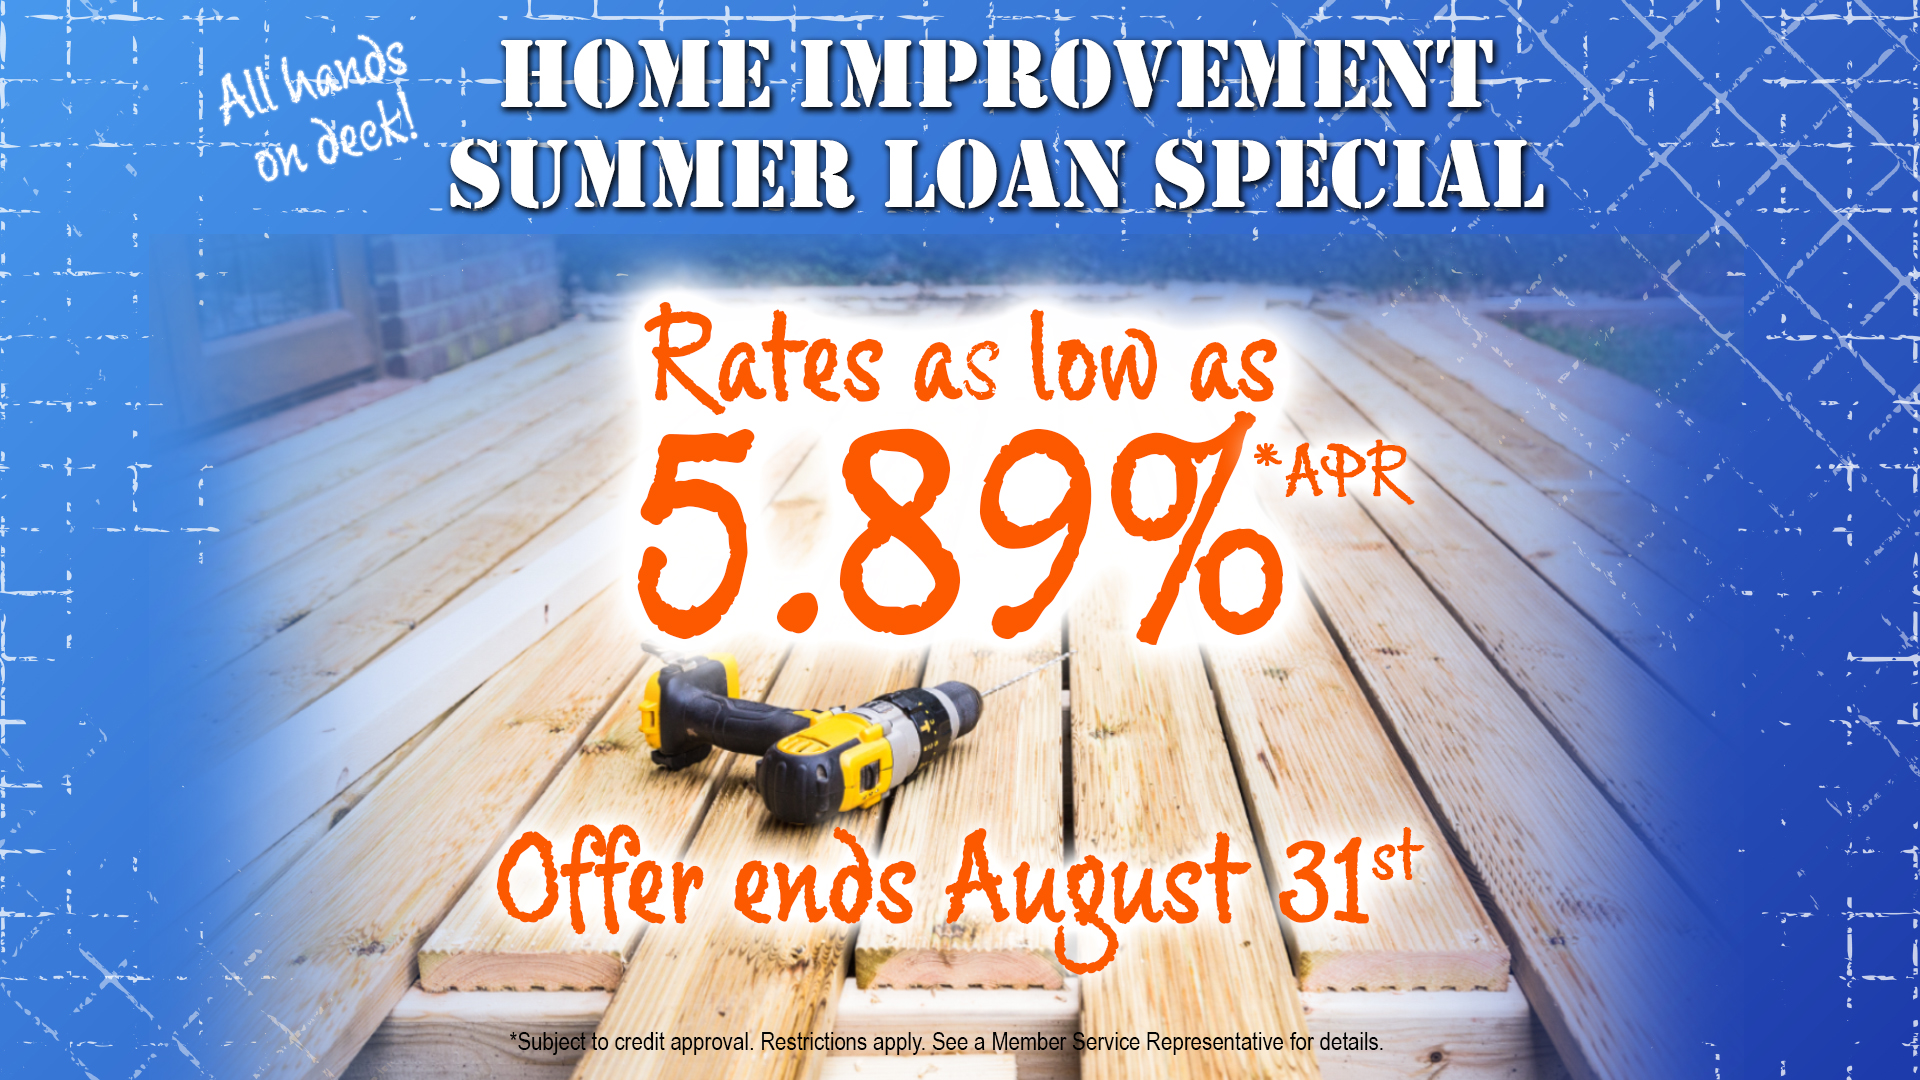 Image: Home Improvement Summer Loan Special. Click for readable text.